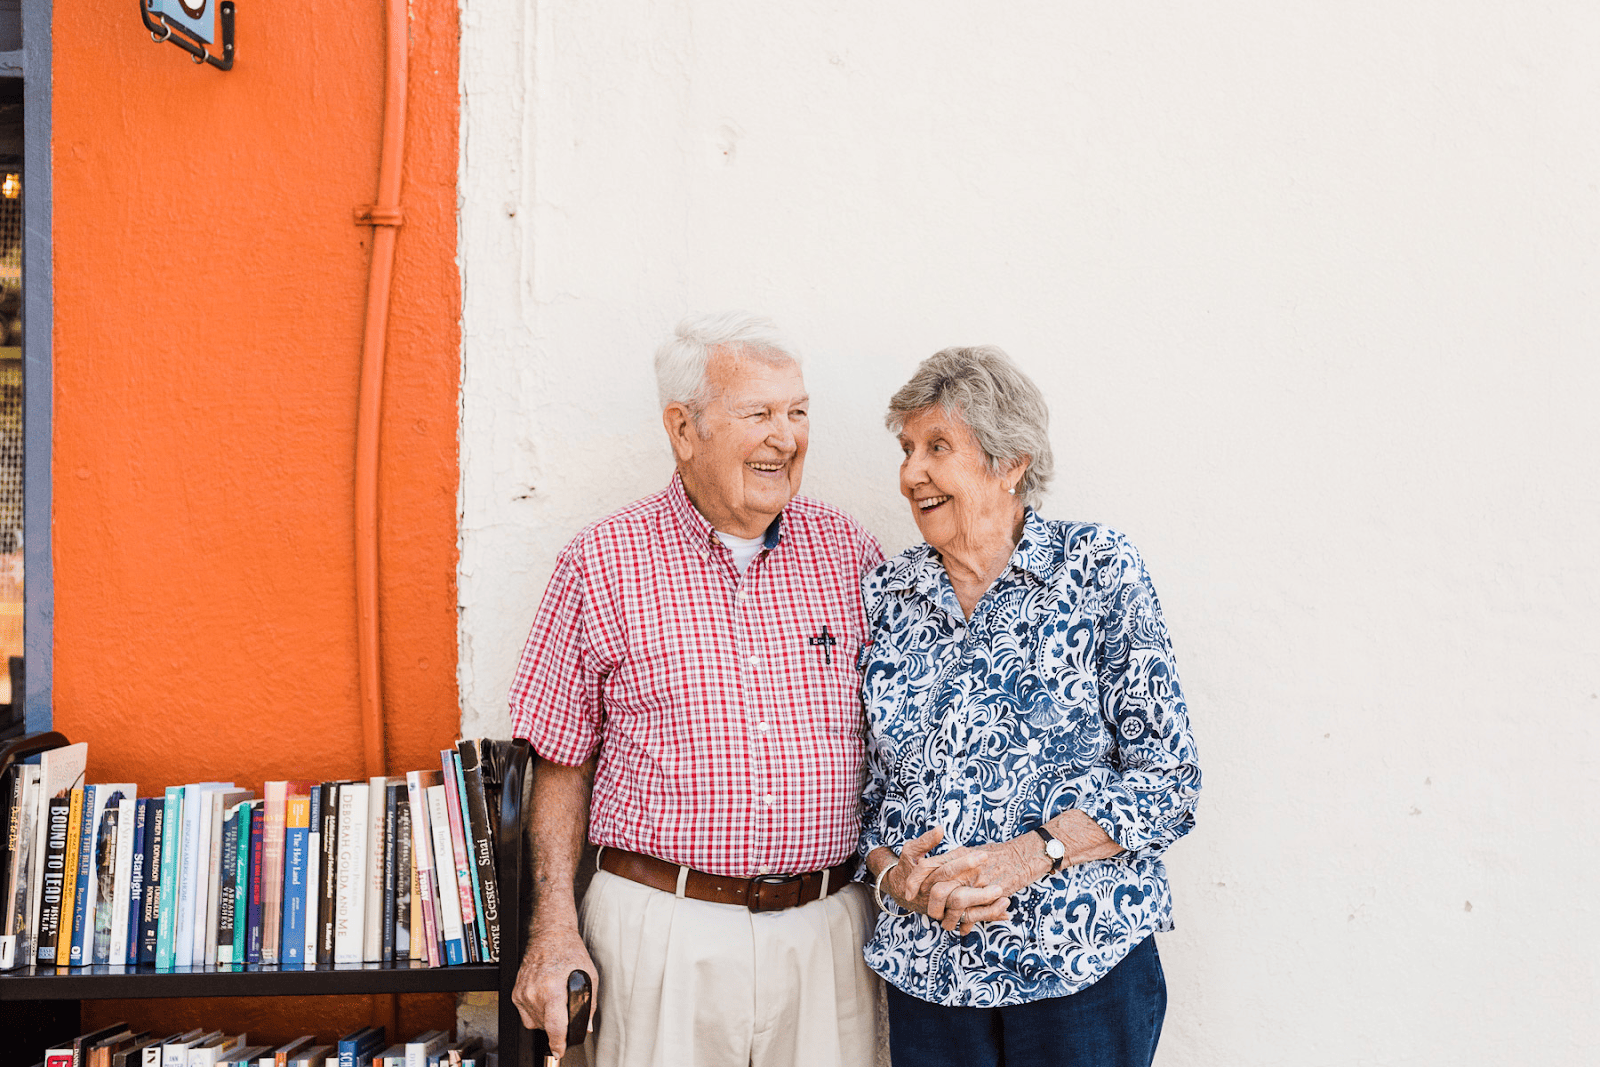 caring for a spouse with memory loss